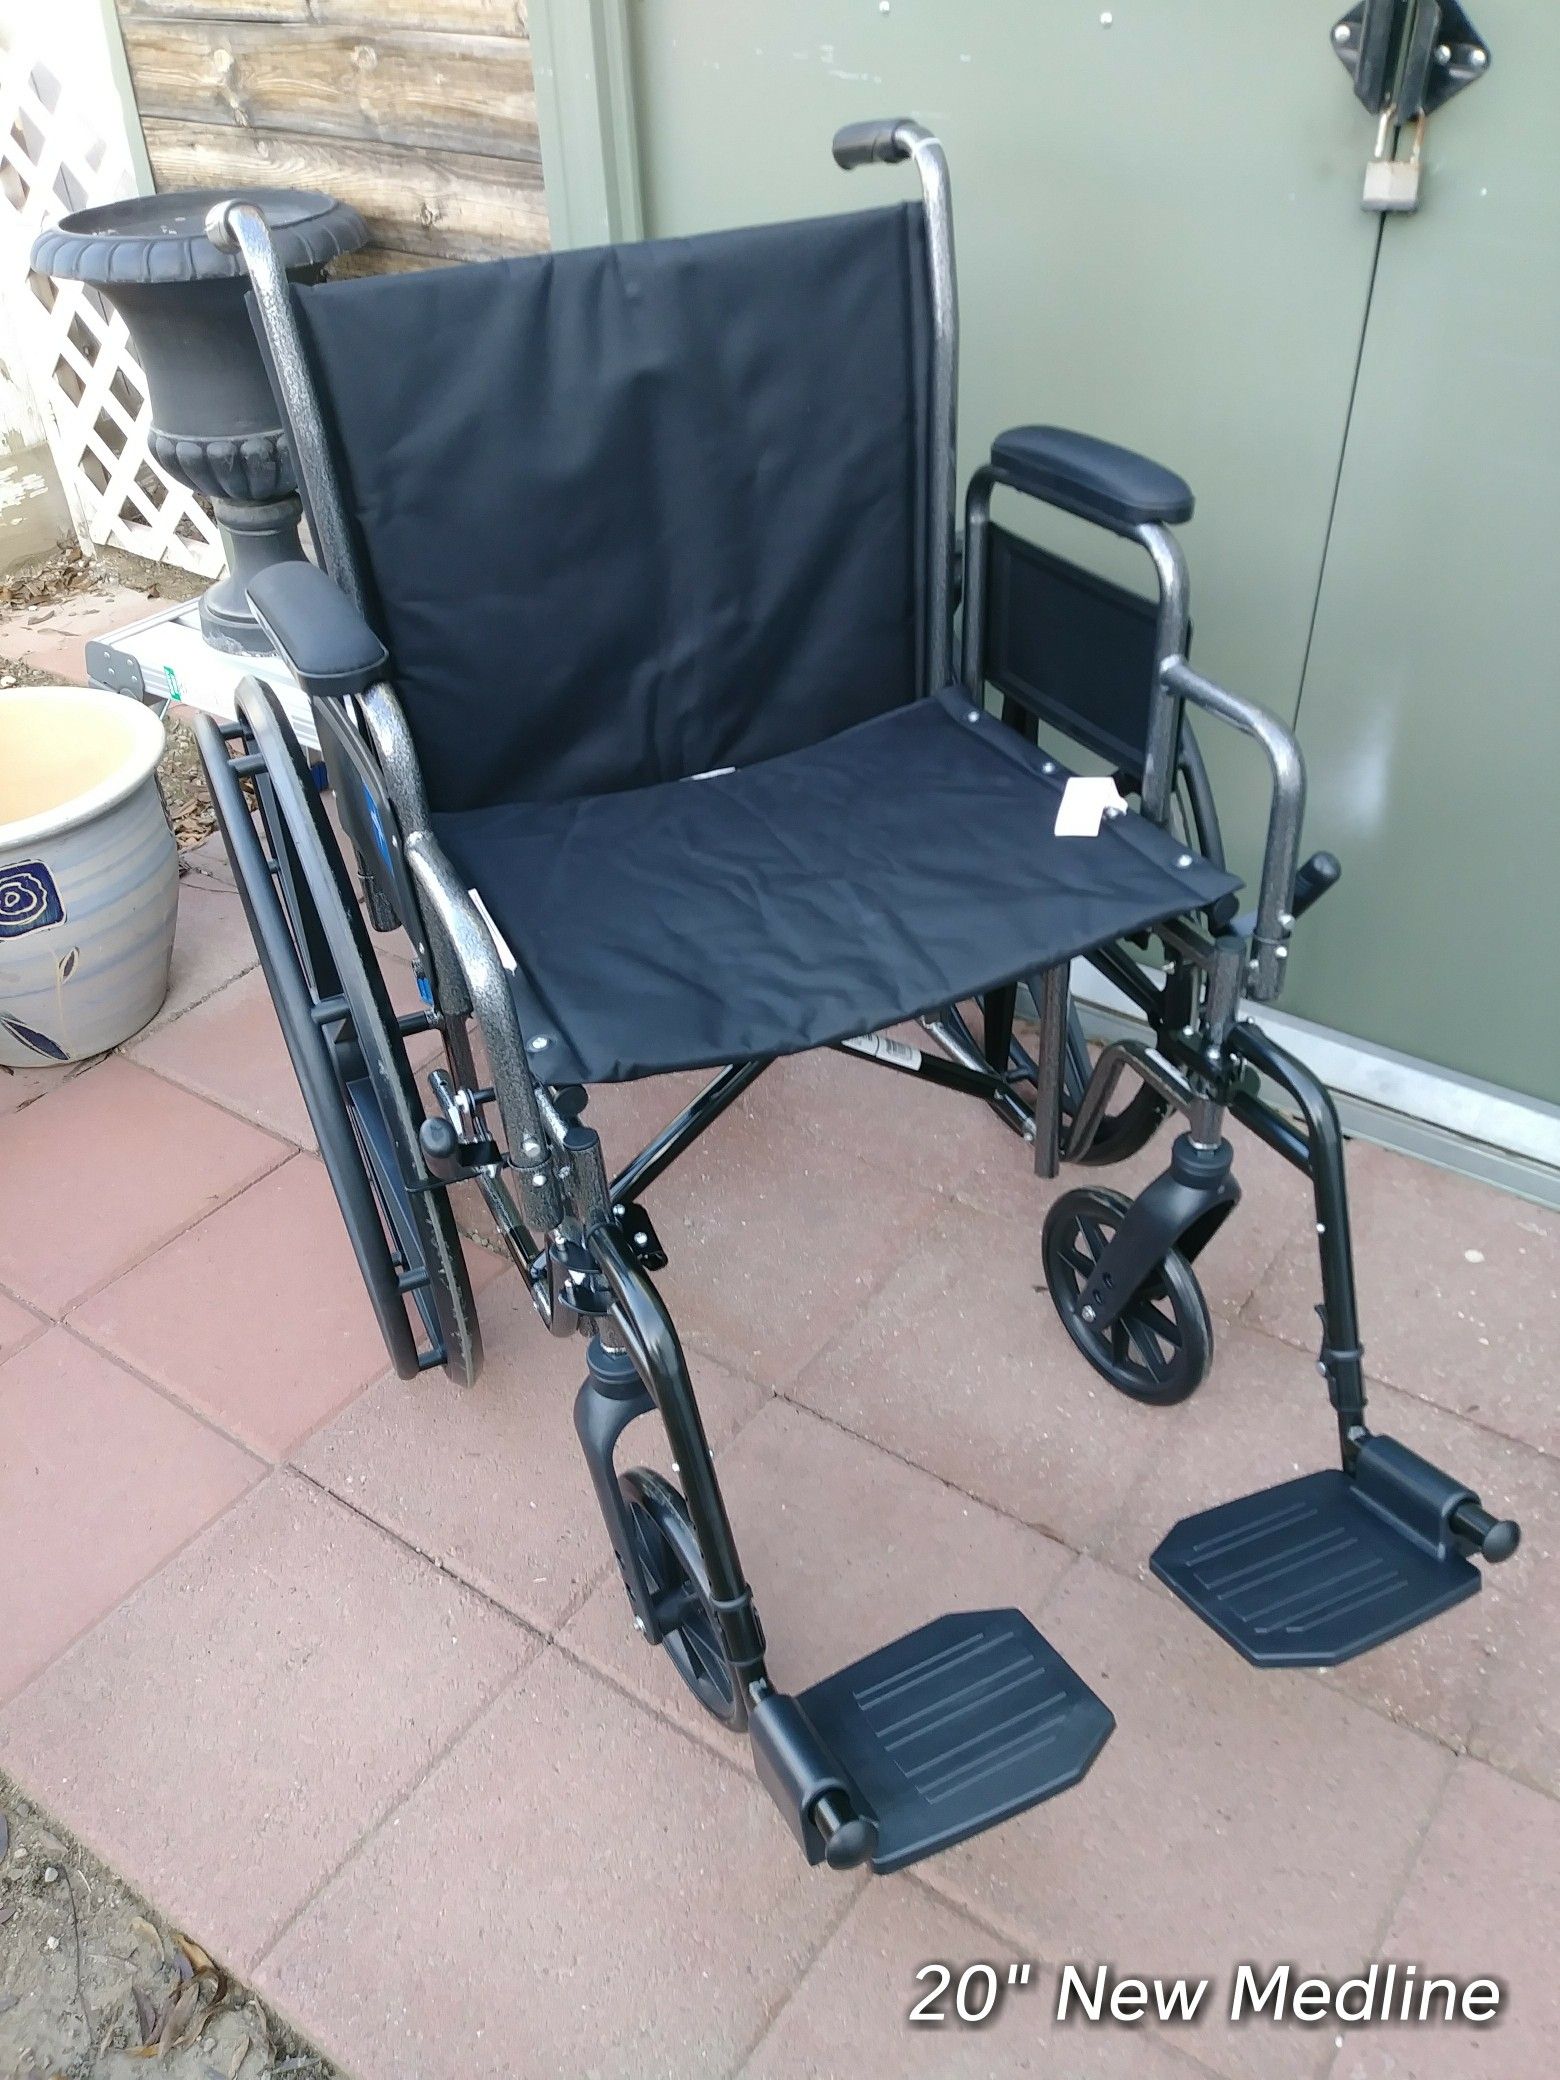 New wheelchair with 20" wide seat